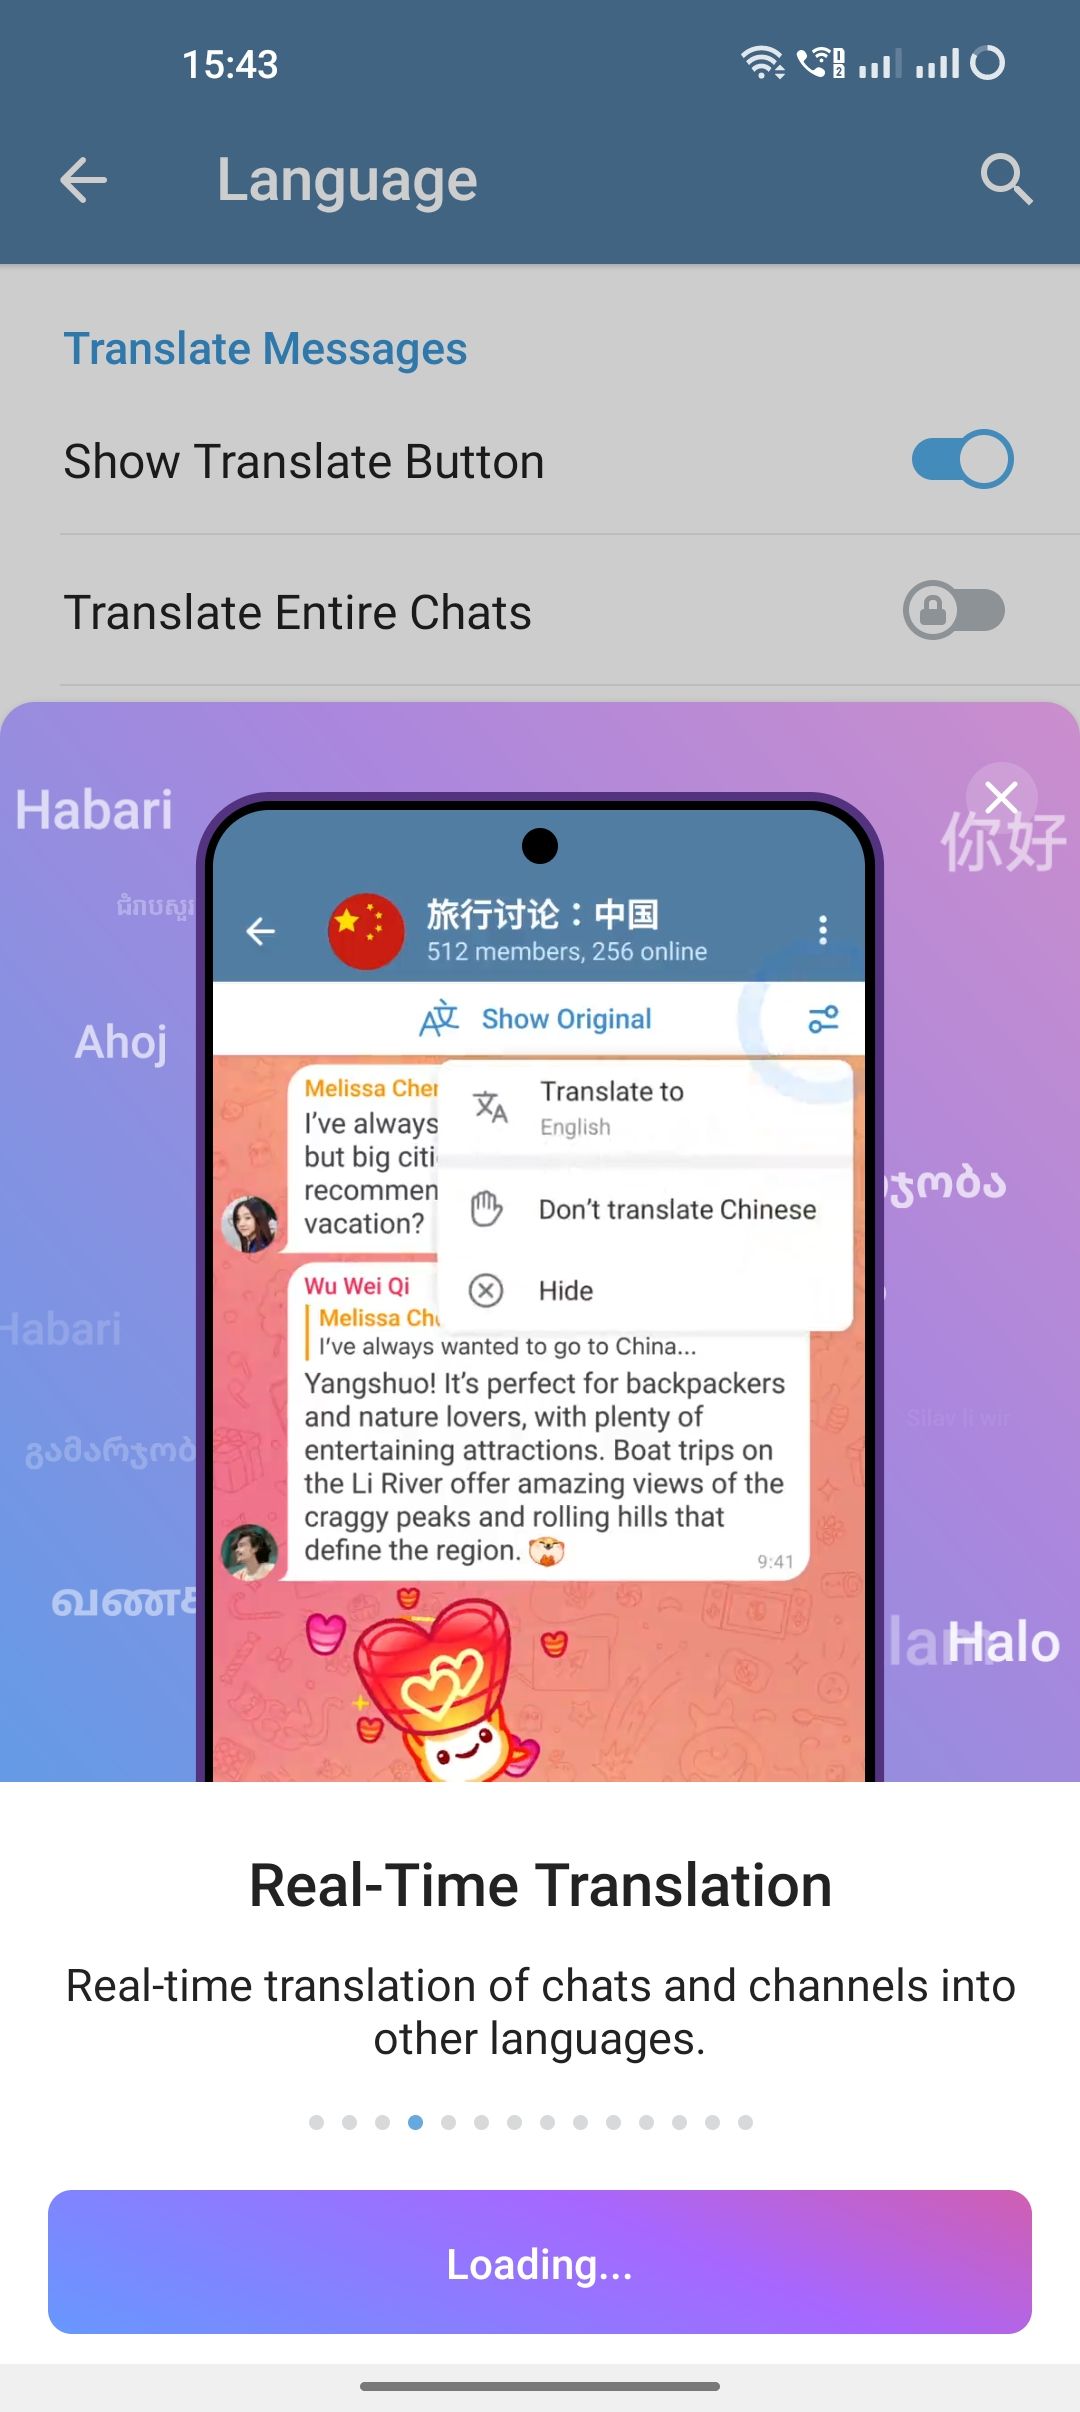 A screenshot of Telegram app's language setting showing the Premium real-time translation feature and its additional on-screen options